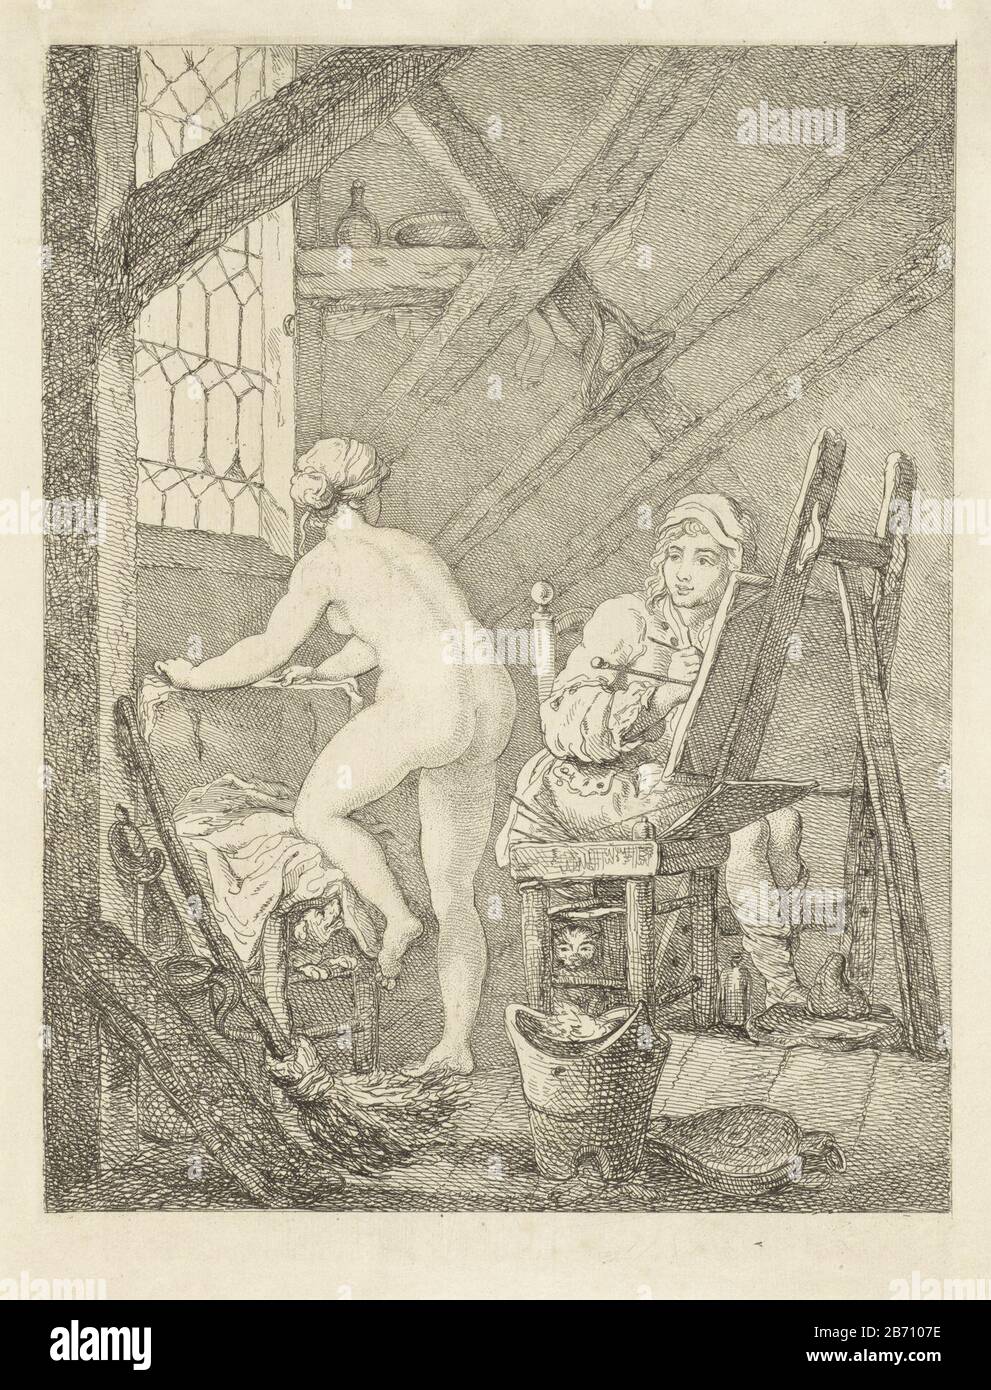 Kunstenaar schildert naar een naaktmodel Left leaning model, a young woman on a stool in a studio. Right is the artist at work behind his easel. His hand rests on a paint stick. Among its seat is a cat. Leading some objects, Where: under a broom, a jug and a blaasbalg. Manufacturer : printmaker: anonymous, designed by Arnold Houbraken to painting by Nicolaas VerkoljePlaats manufacture: Netherlands Date: 1678 - 1769 Physical features: etching material: paper Technique: etching Dimensions: plate edge: h 315 mm × W 240 mm Subject: model, sitter  painting (+ in workshop or studio) Stock Photo